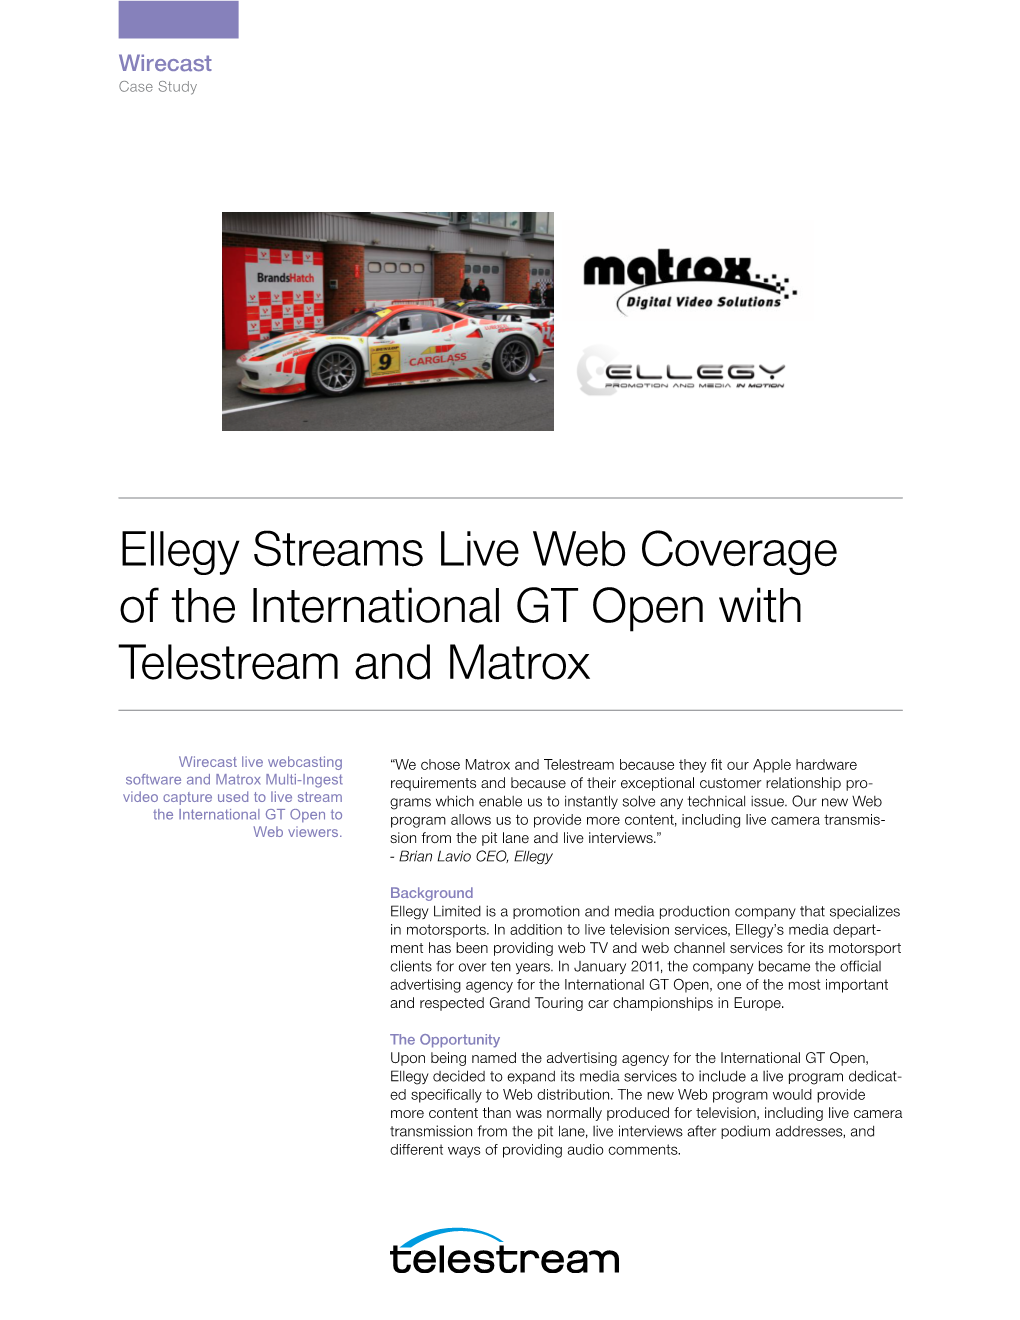 Ellegy Streams Live Web Coverage of the International GT Open with Telestream and Matrox